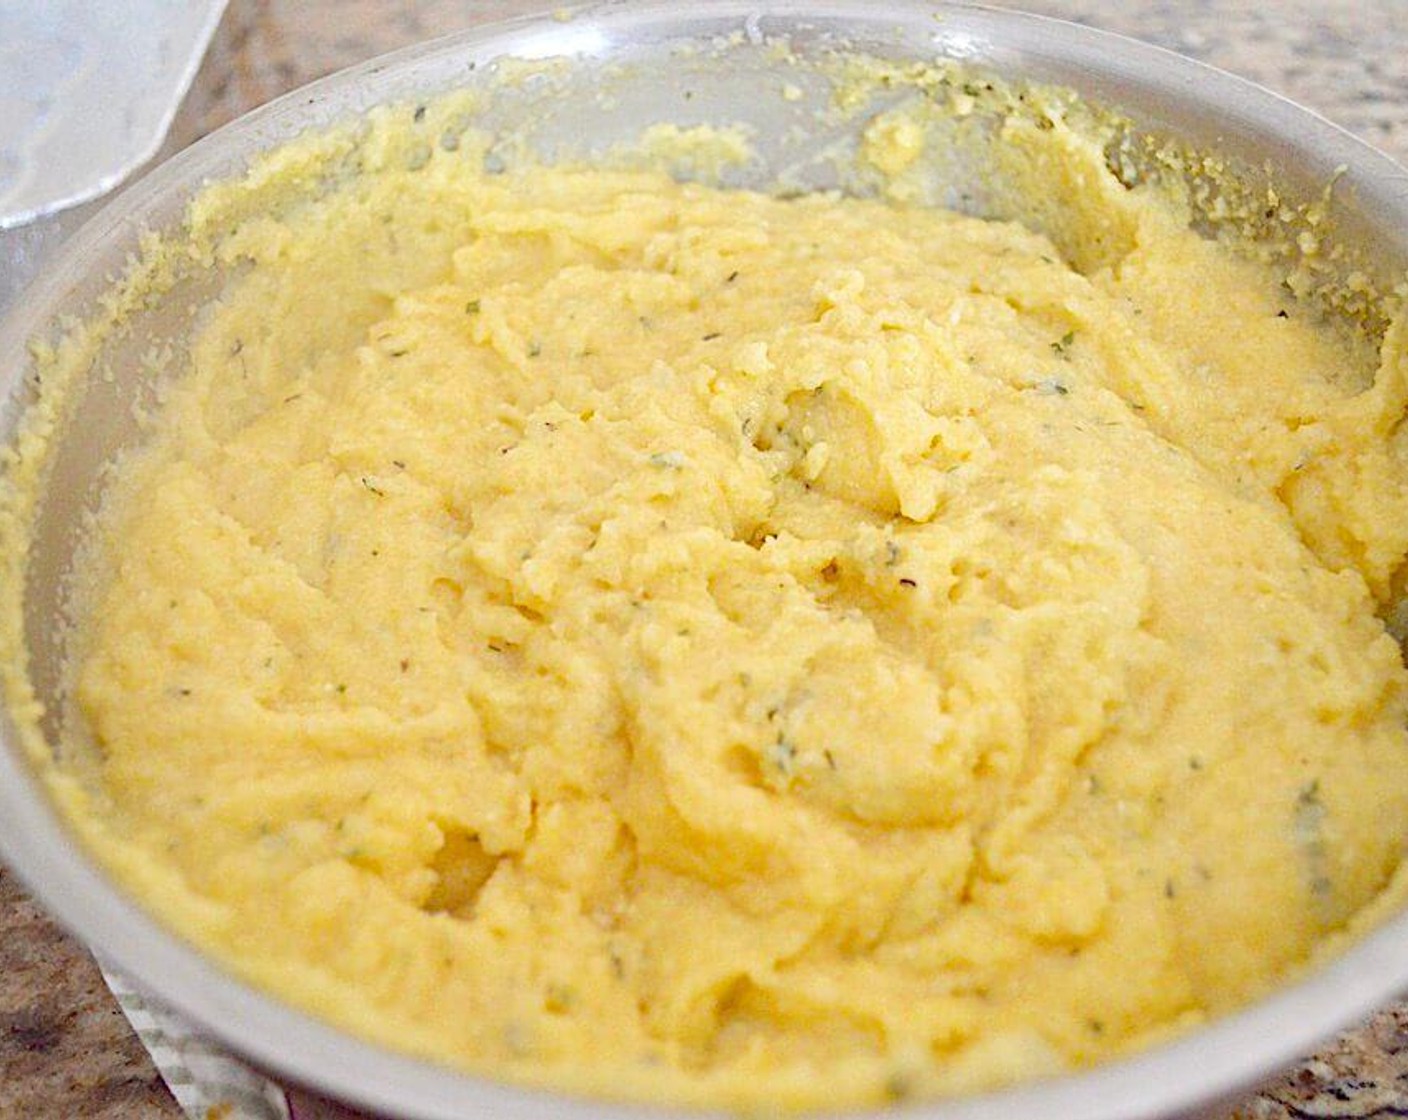 step 3 Then slowly pour in the Polenta (1 cup) while you continue to whisk. Keep whisking while the polenta cooks for about 3 minutes. Once it is cooked, remove the pot from the heat and stir in the sauce and Asiago Cheese (1/4 cup).